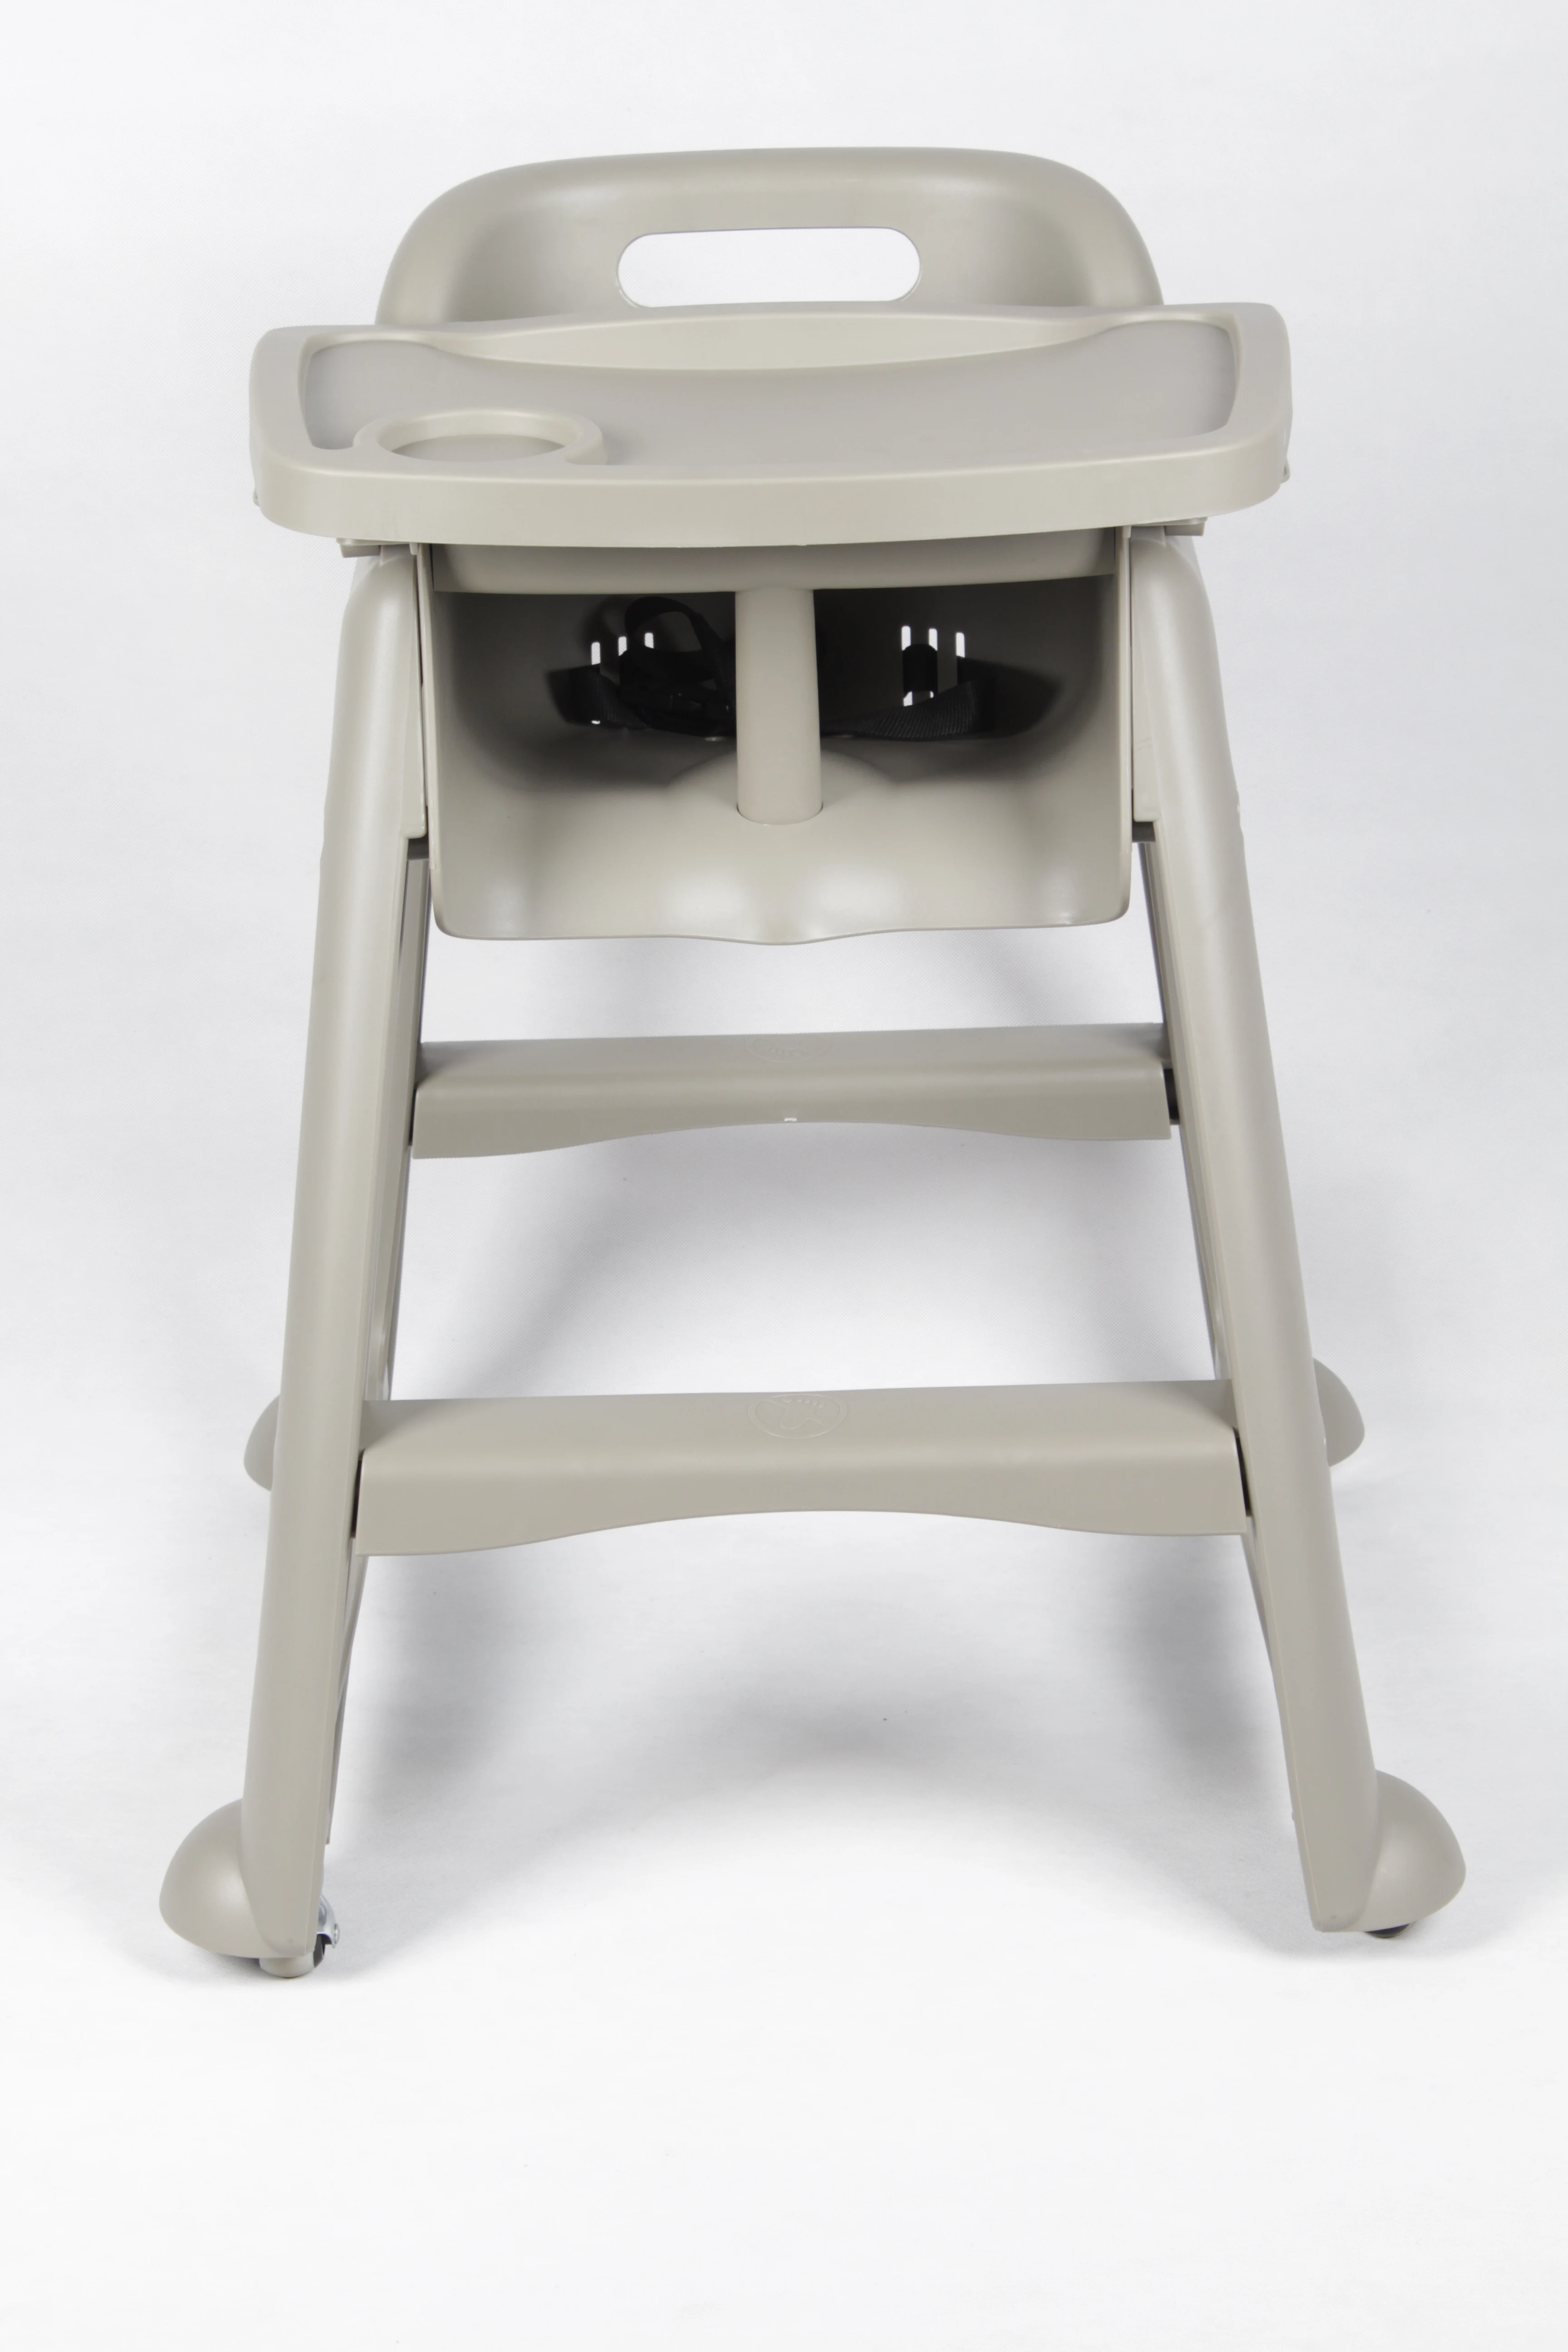 Baby feeding chair / wholesale multi-function moving plastic baby high chair for restaurant